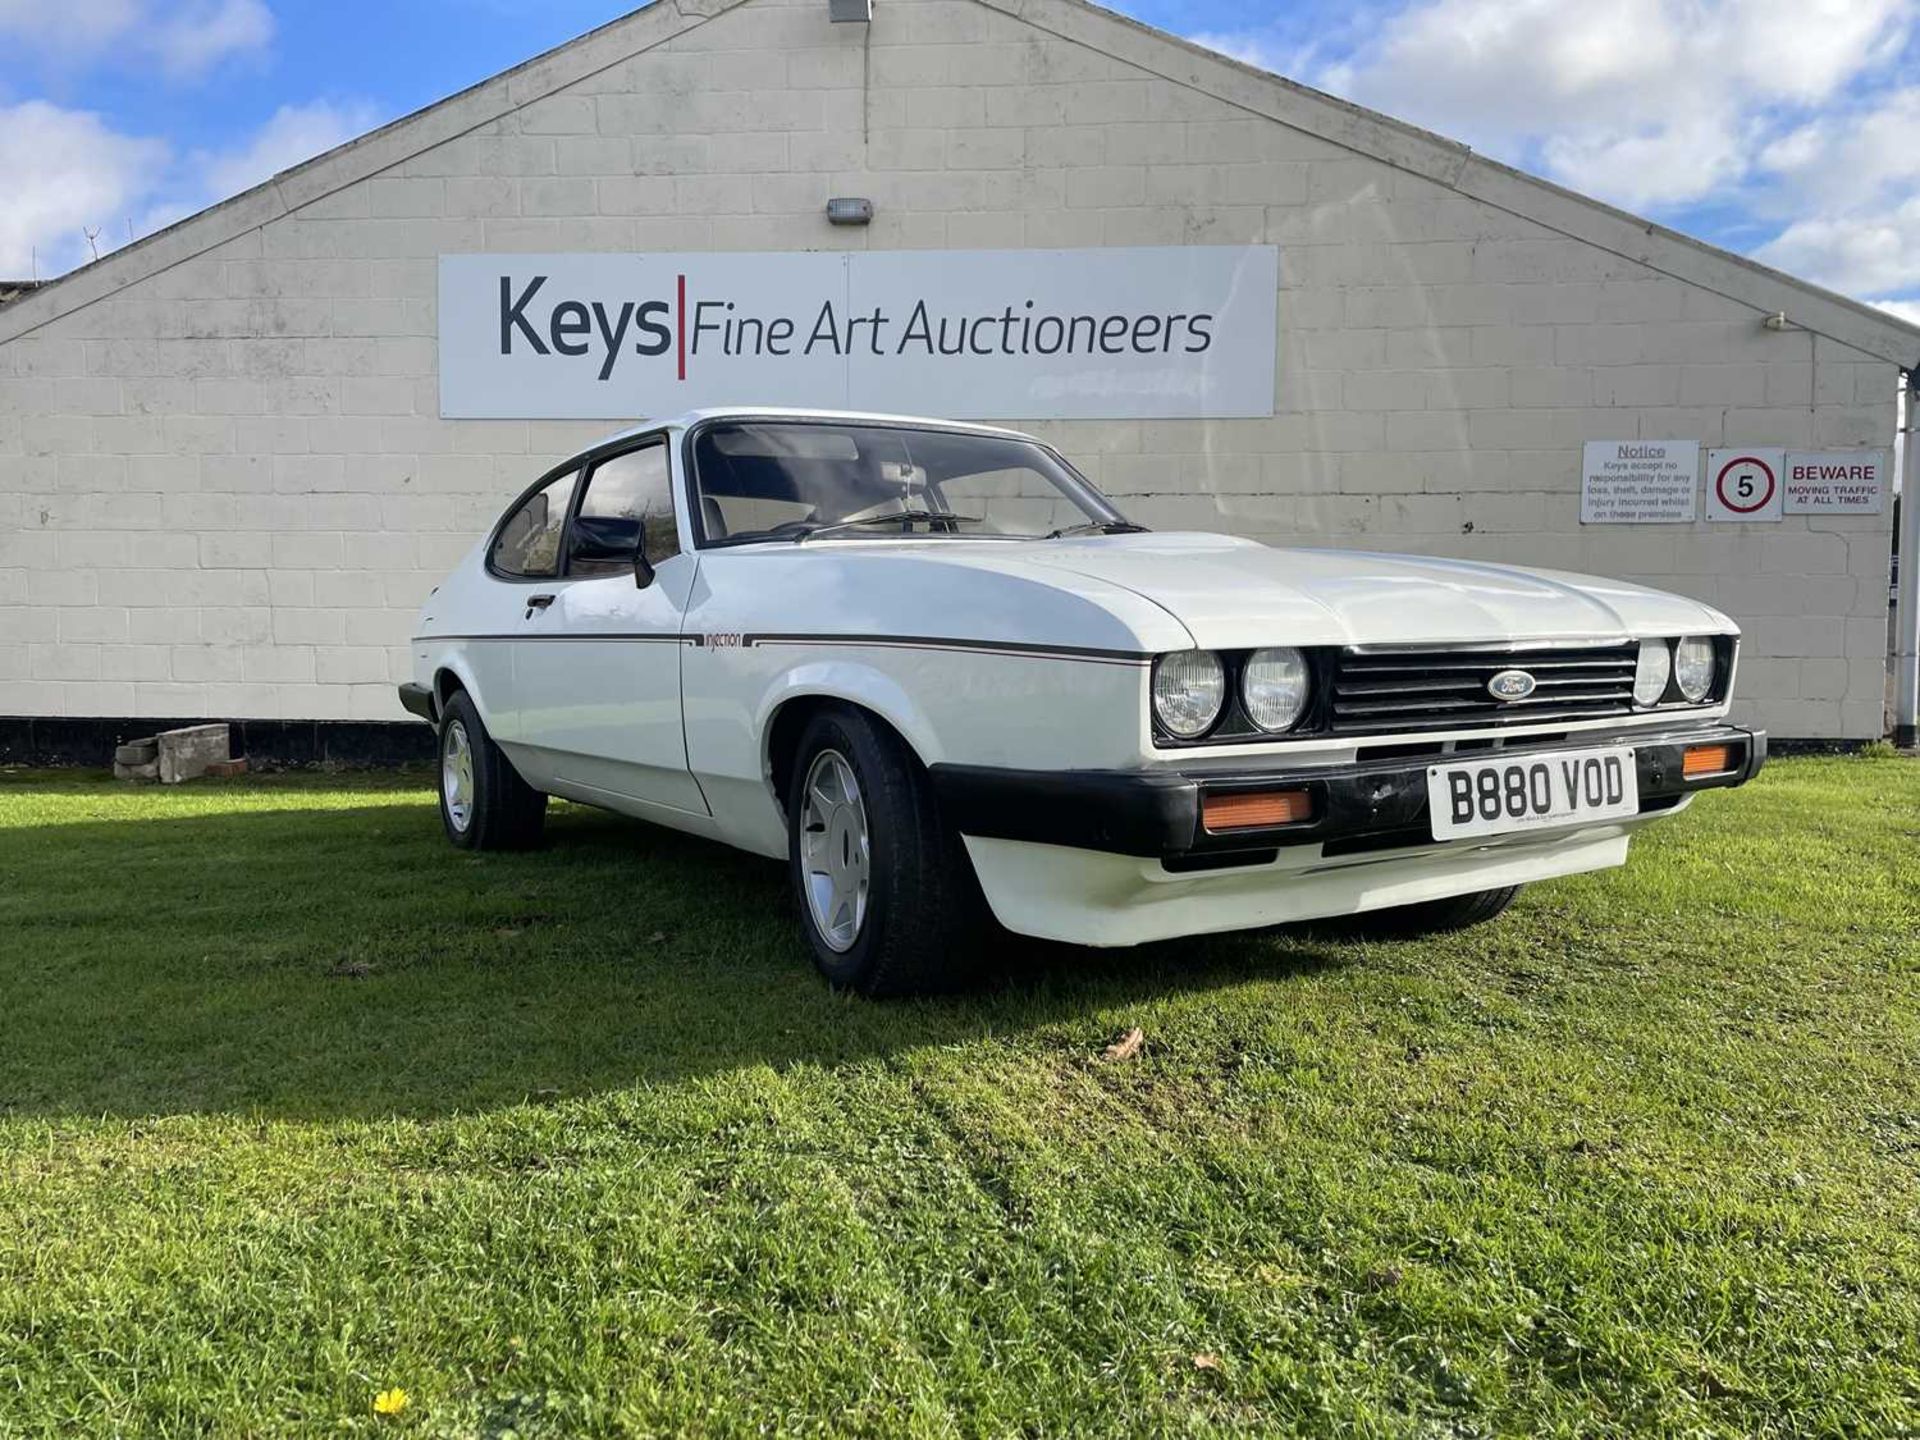 1984 Ford Capri 2.8 Injection - Image 3 of 6